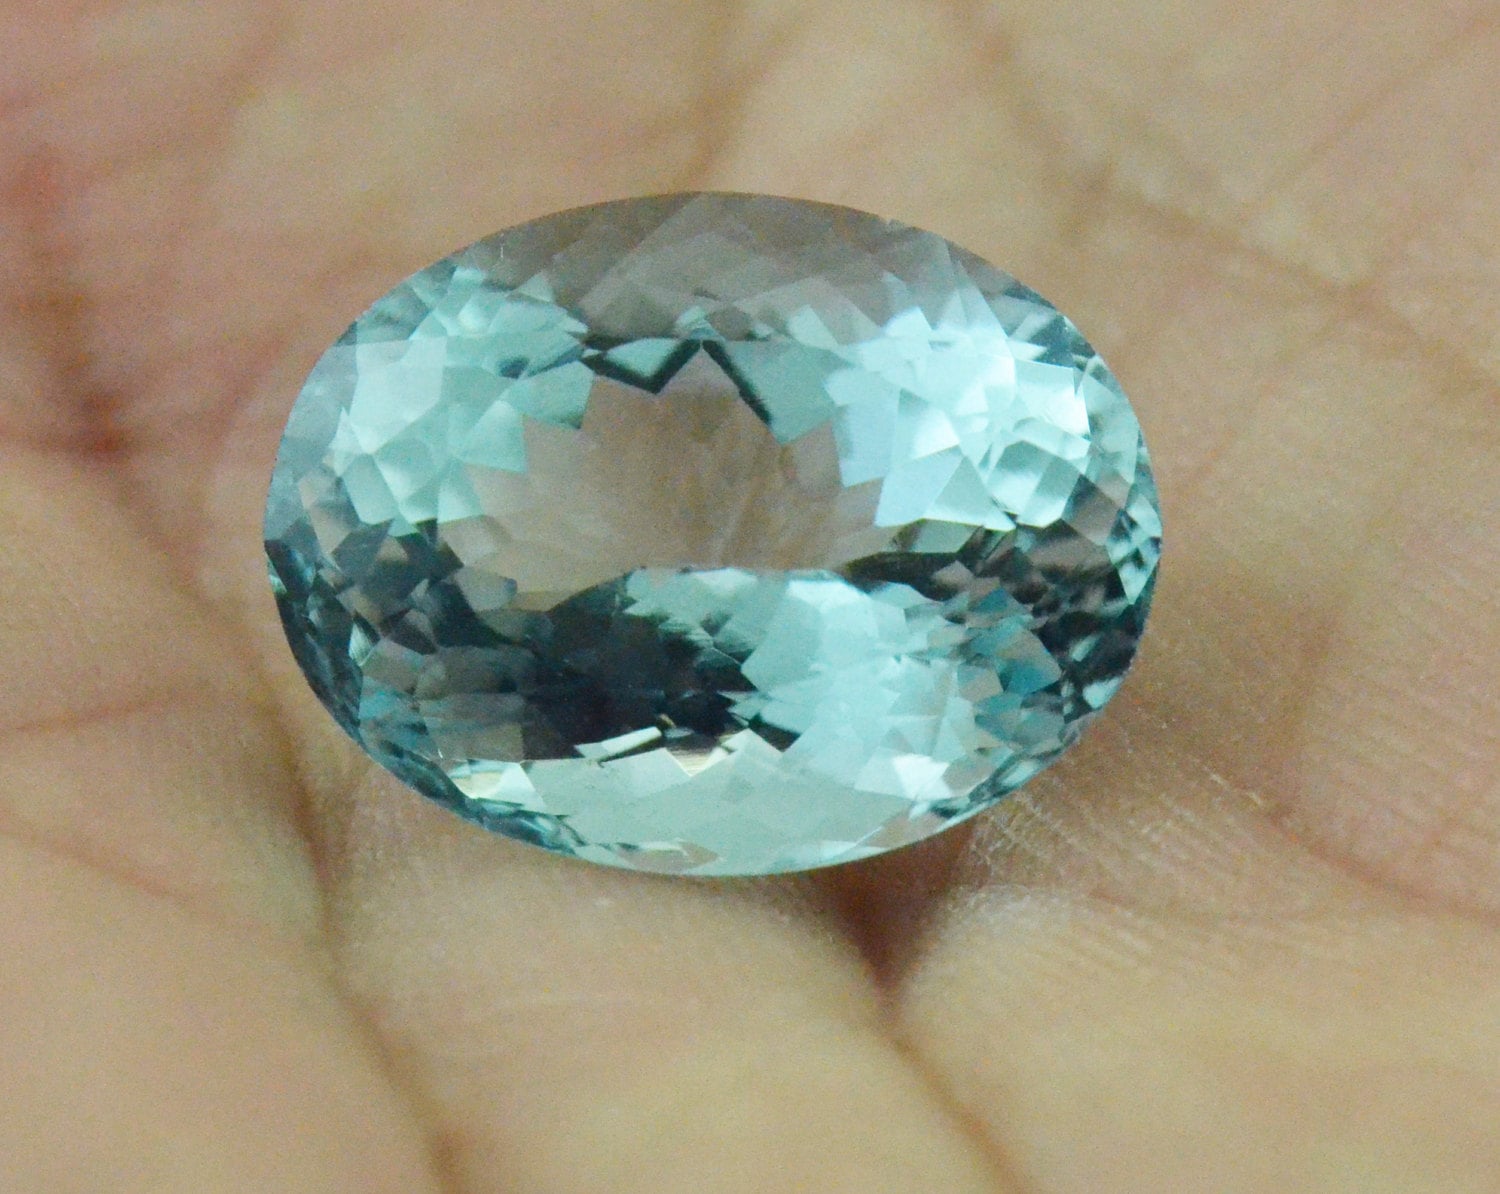 8.94ct oval Aquamarine gemstone certified 15.52 by 12.06 by | Etsy